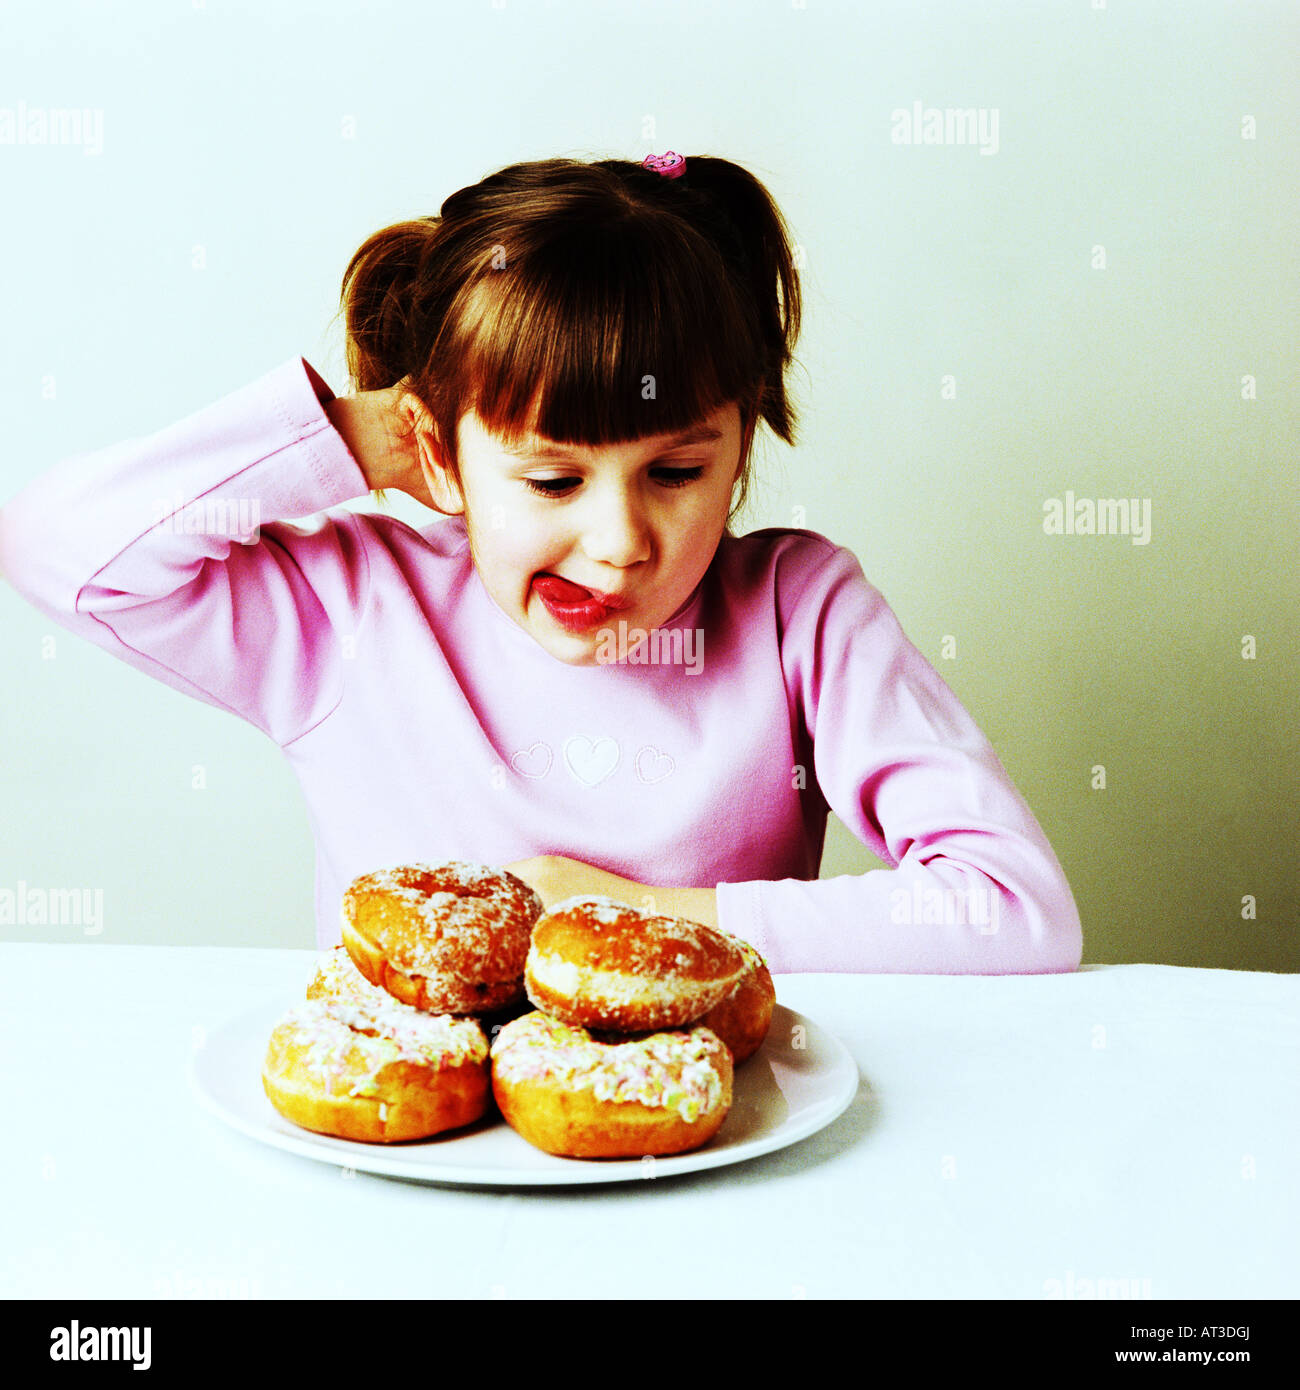 A girl sitting looking at a plate of doughnuts Stock Photo